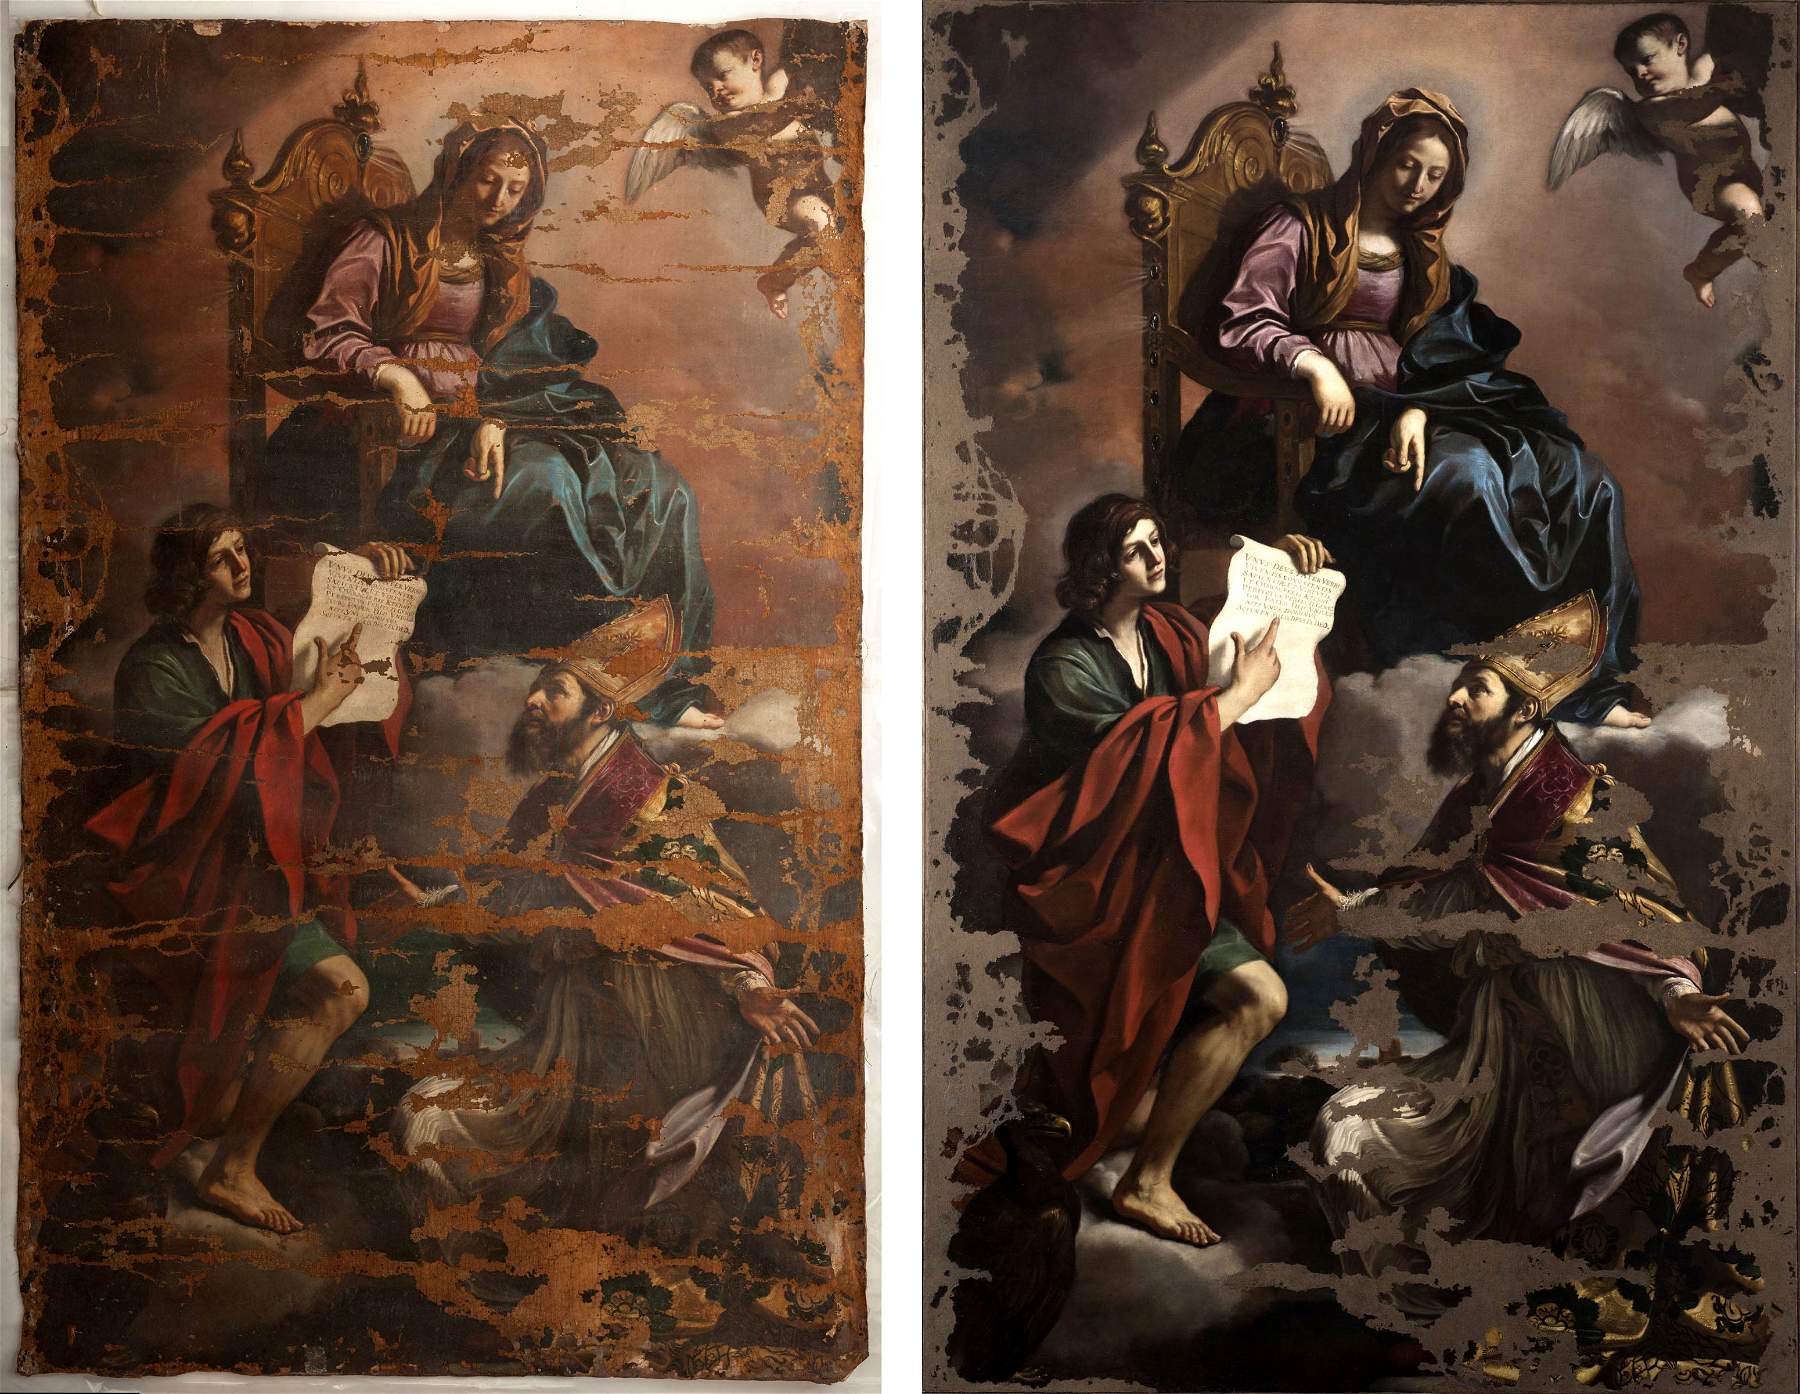 Guercino restoration before and after, it's a clash. Ficacci: no to the way it was where it was. Gattari: incomplete work